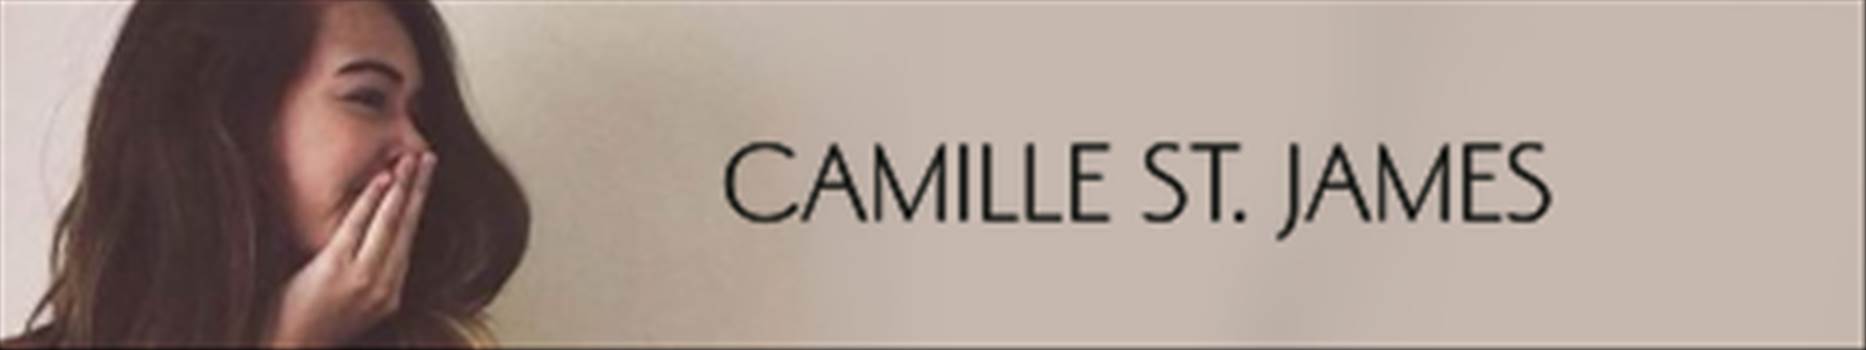 CAMILLE-TRACKER.png - 